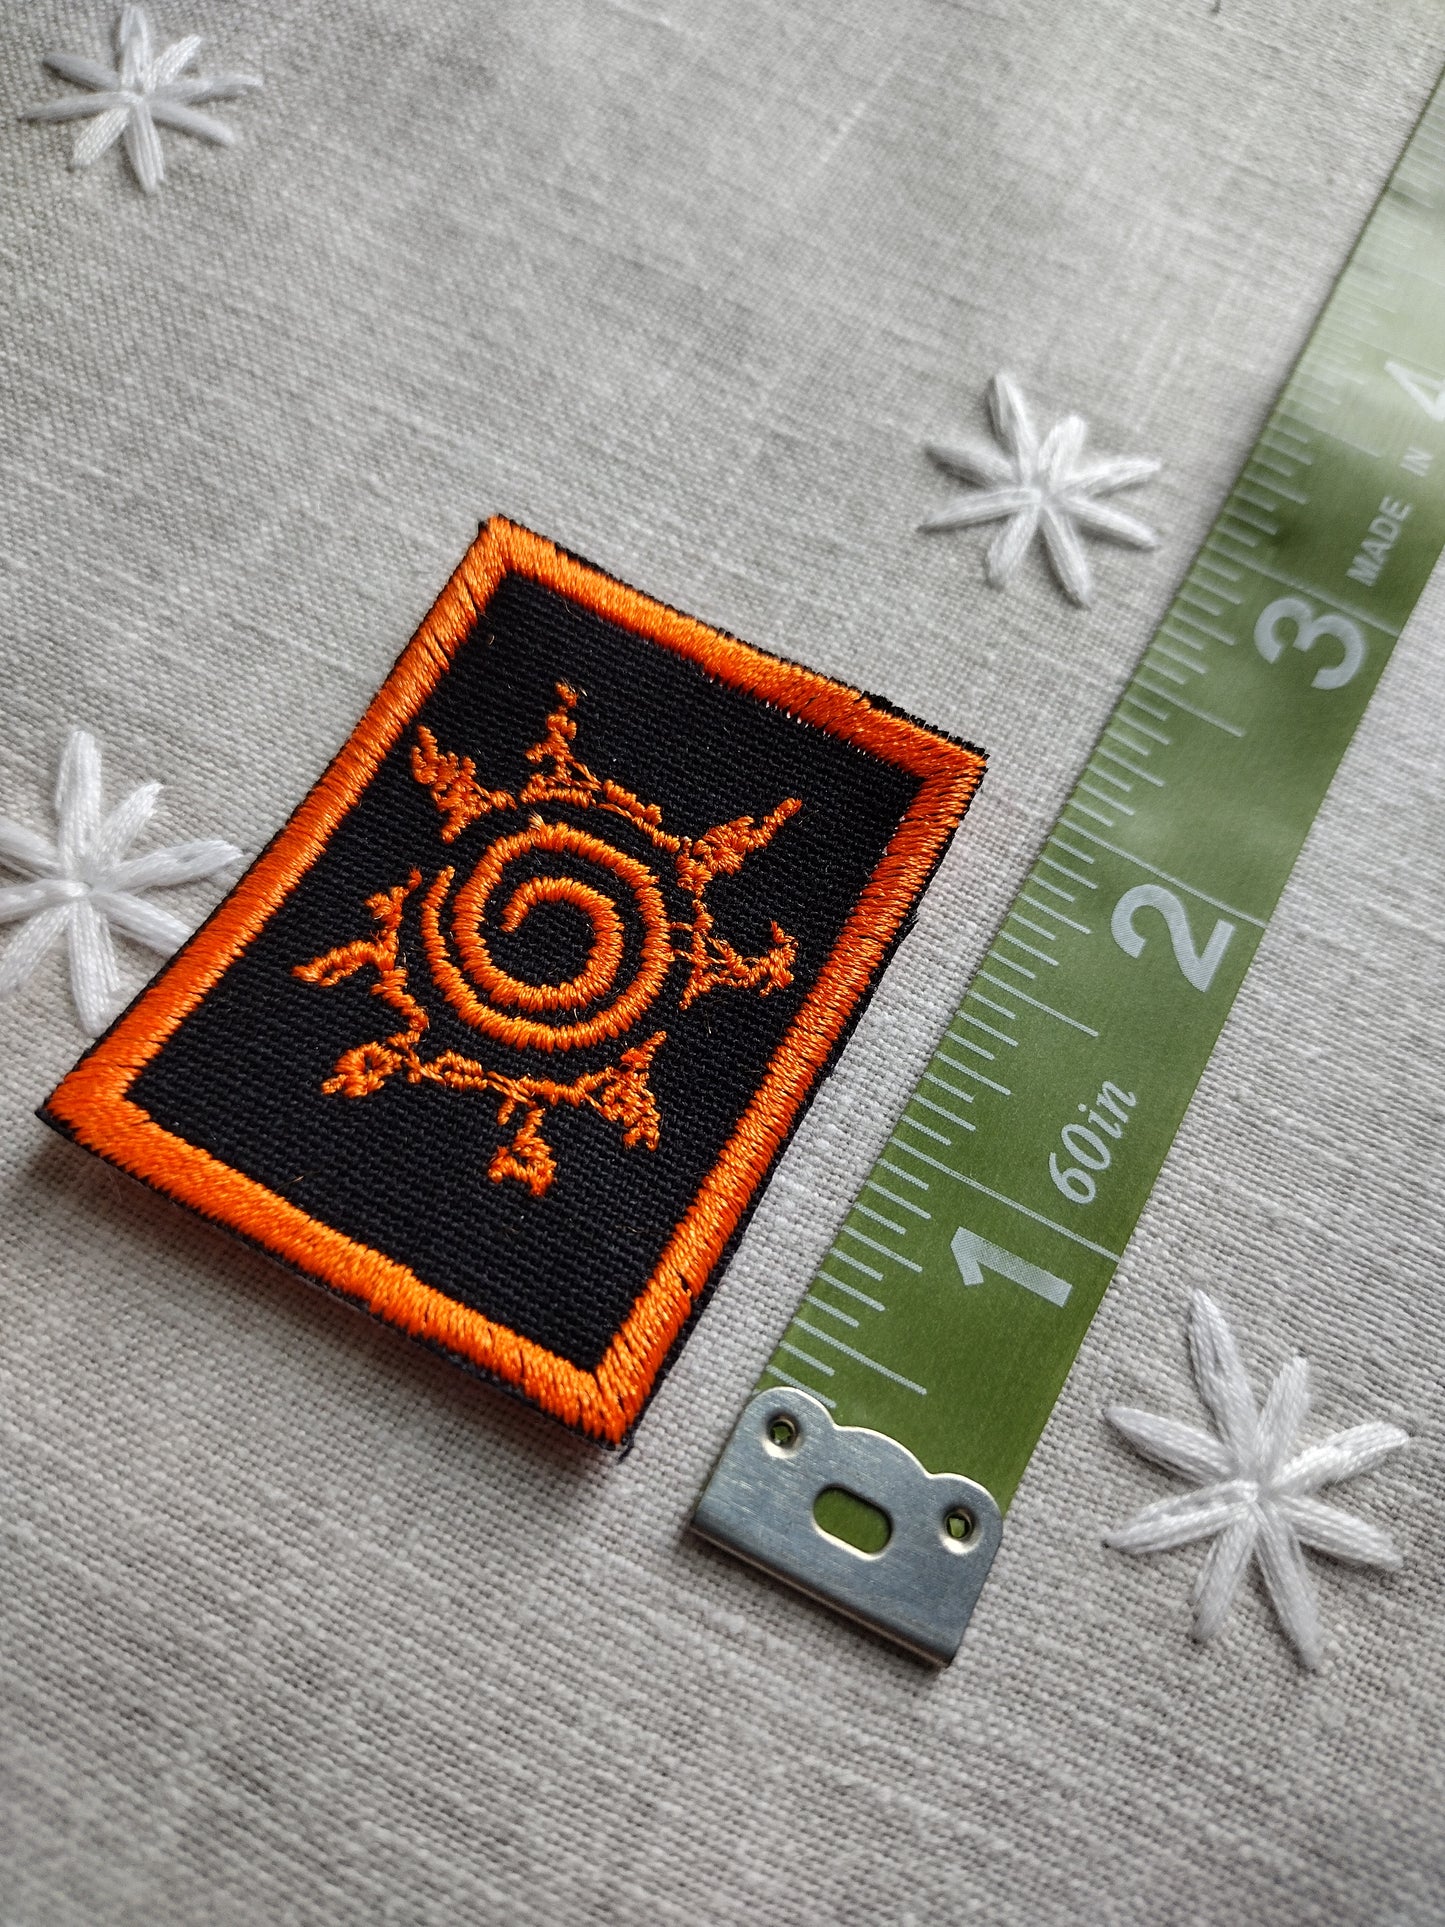 Nine tailes seal patch *sew on*